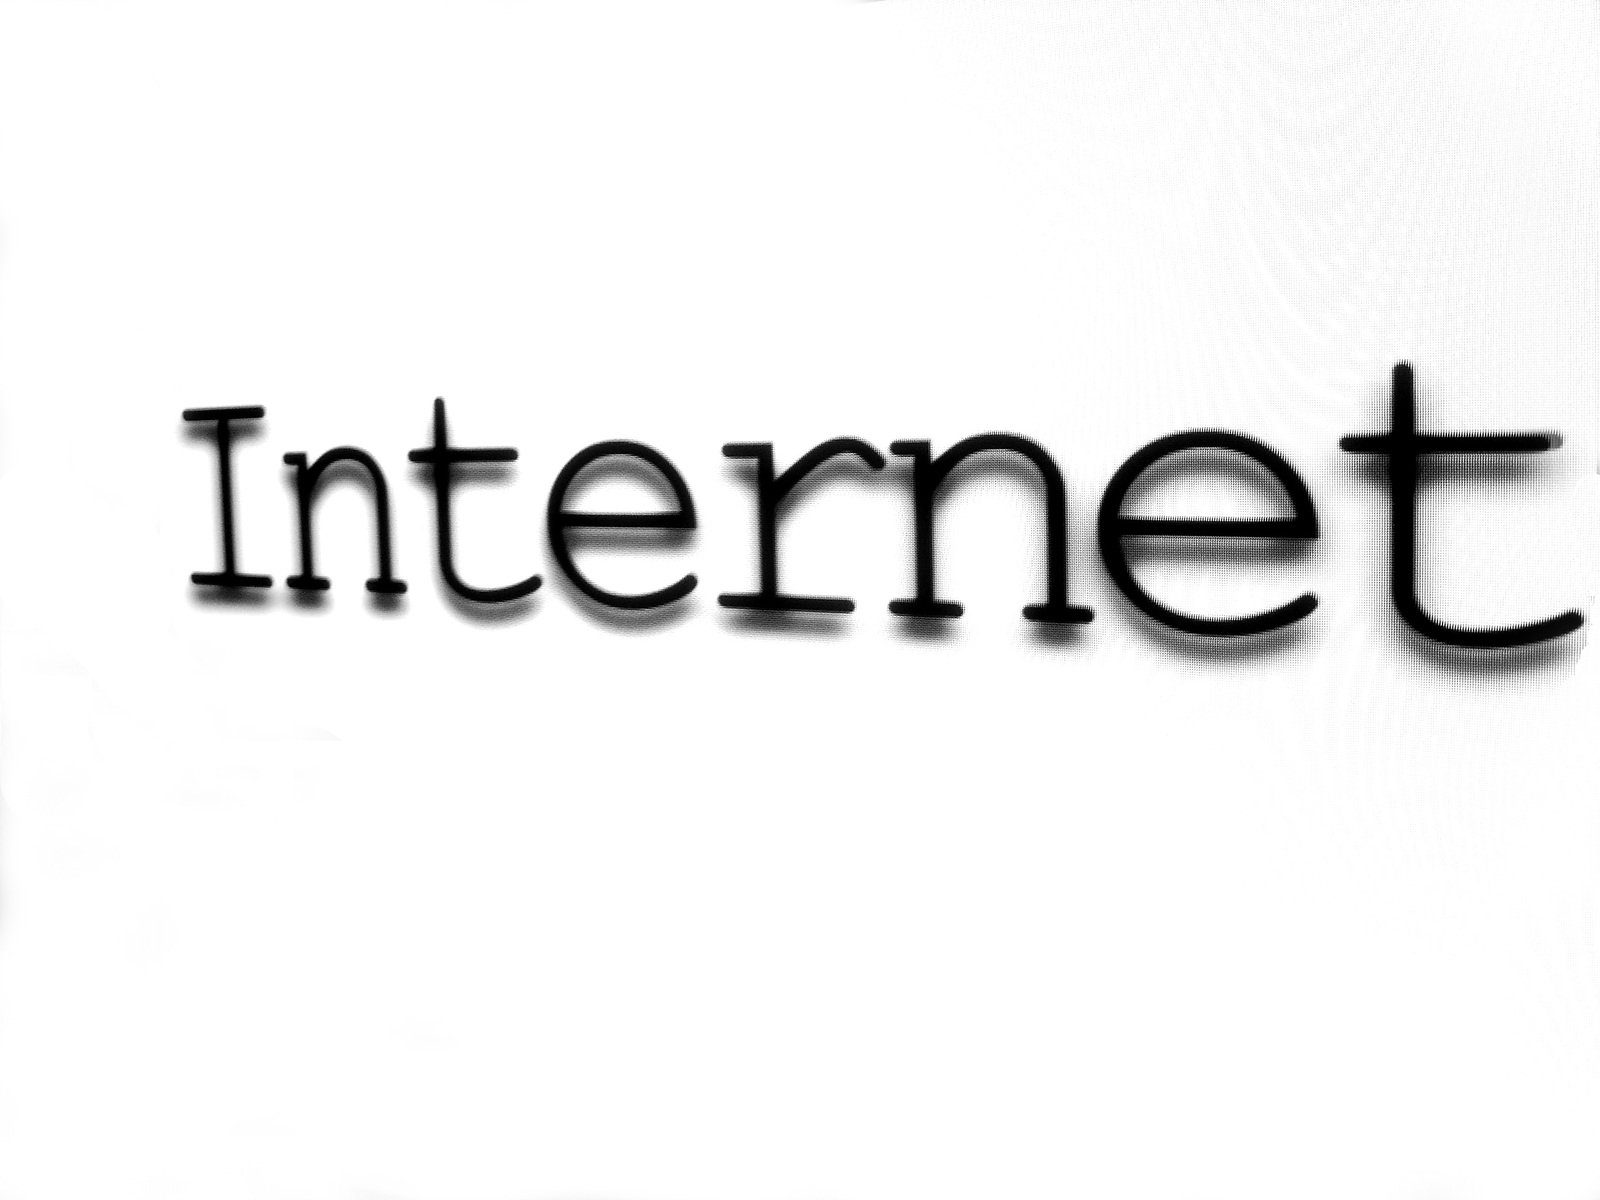 the word internet written on a white background